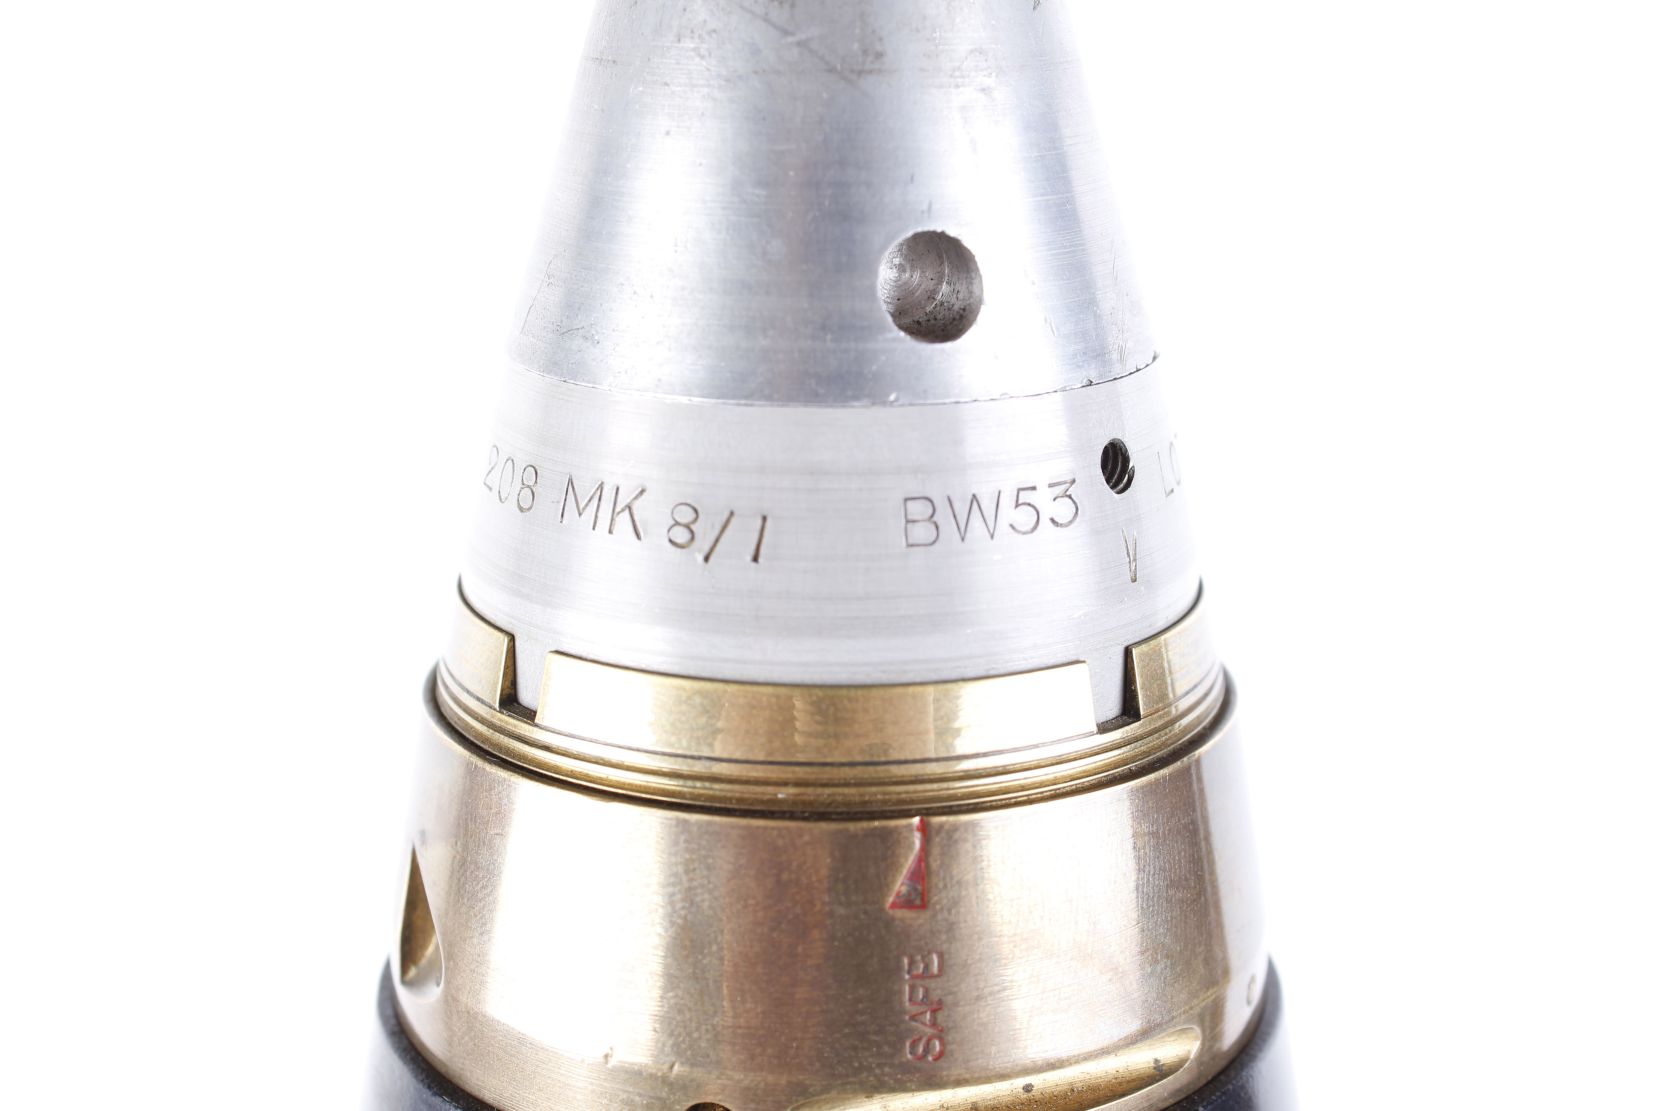 4¾ ins hollow shell with British 1953 Type 208 Mk 8/1 brass and alloy artillery fuse, no. 008519 - Image 2 of 4